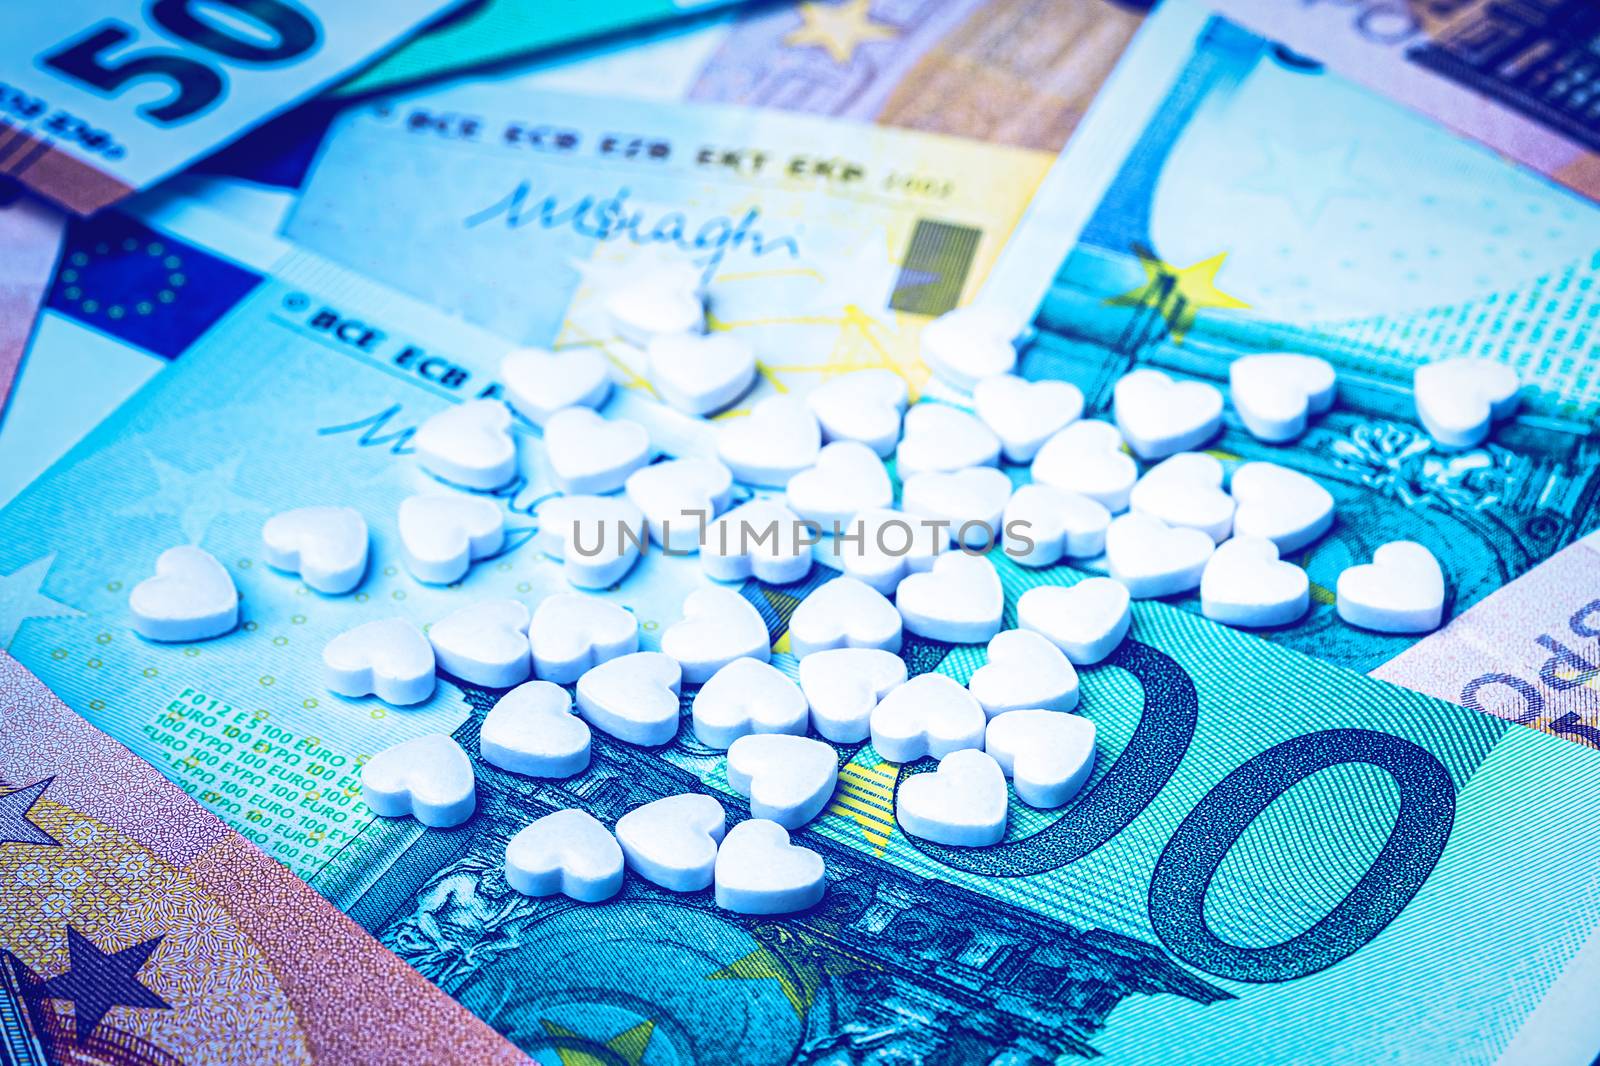 Heart-shape pills on the background of euro bills. The concept of the expensive cost of healthcare or financing medicine.